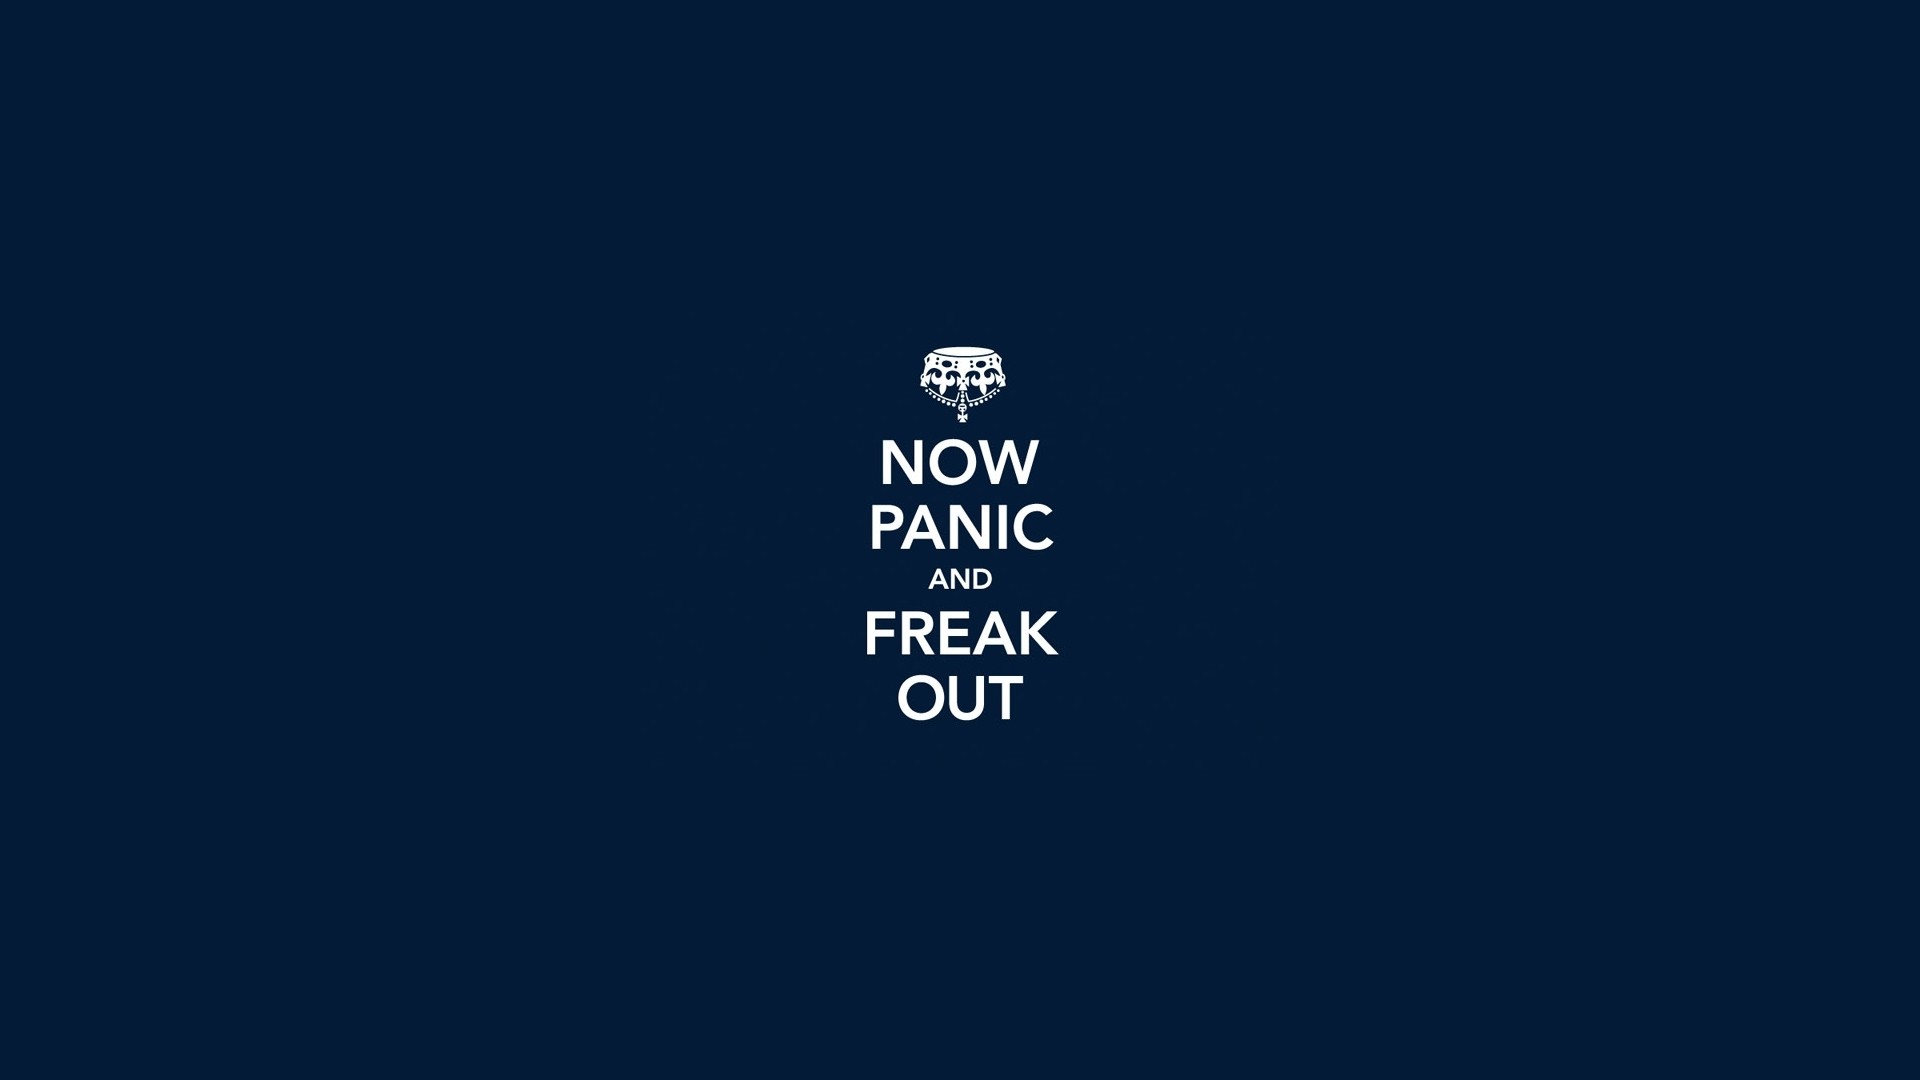 Keep calm and carry on wallpaper Now panic and freak out humor funny 1920x1080